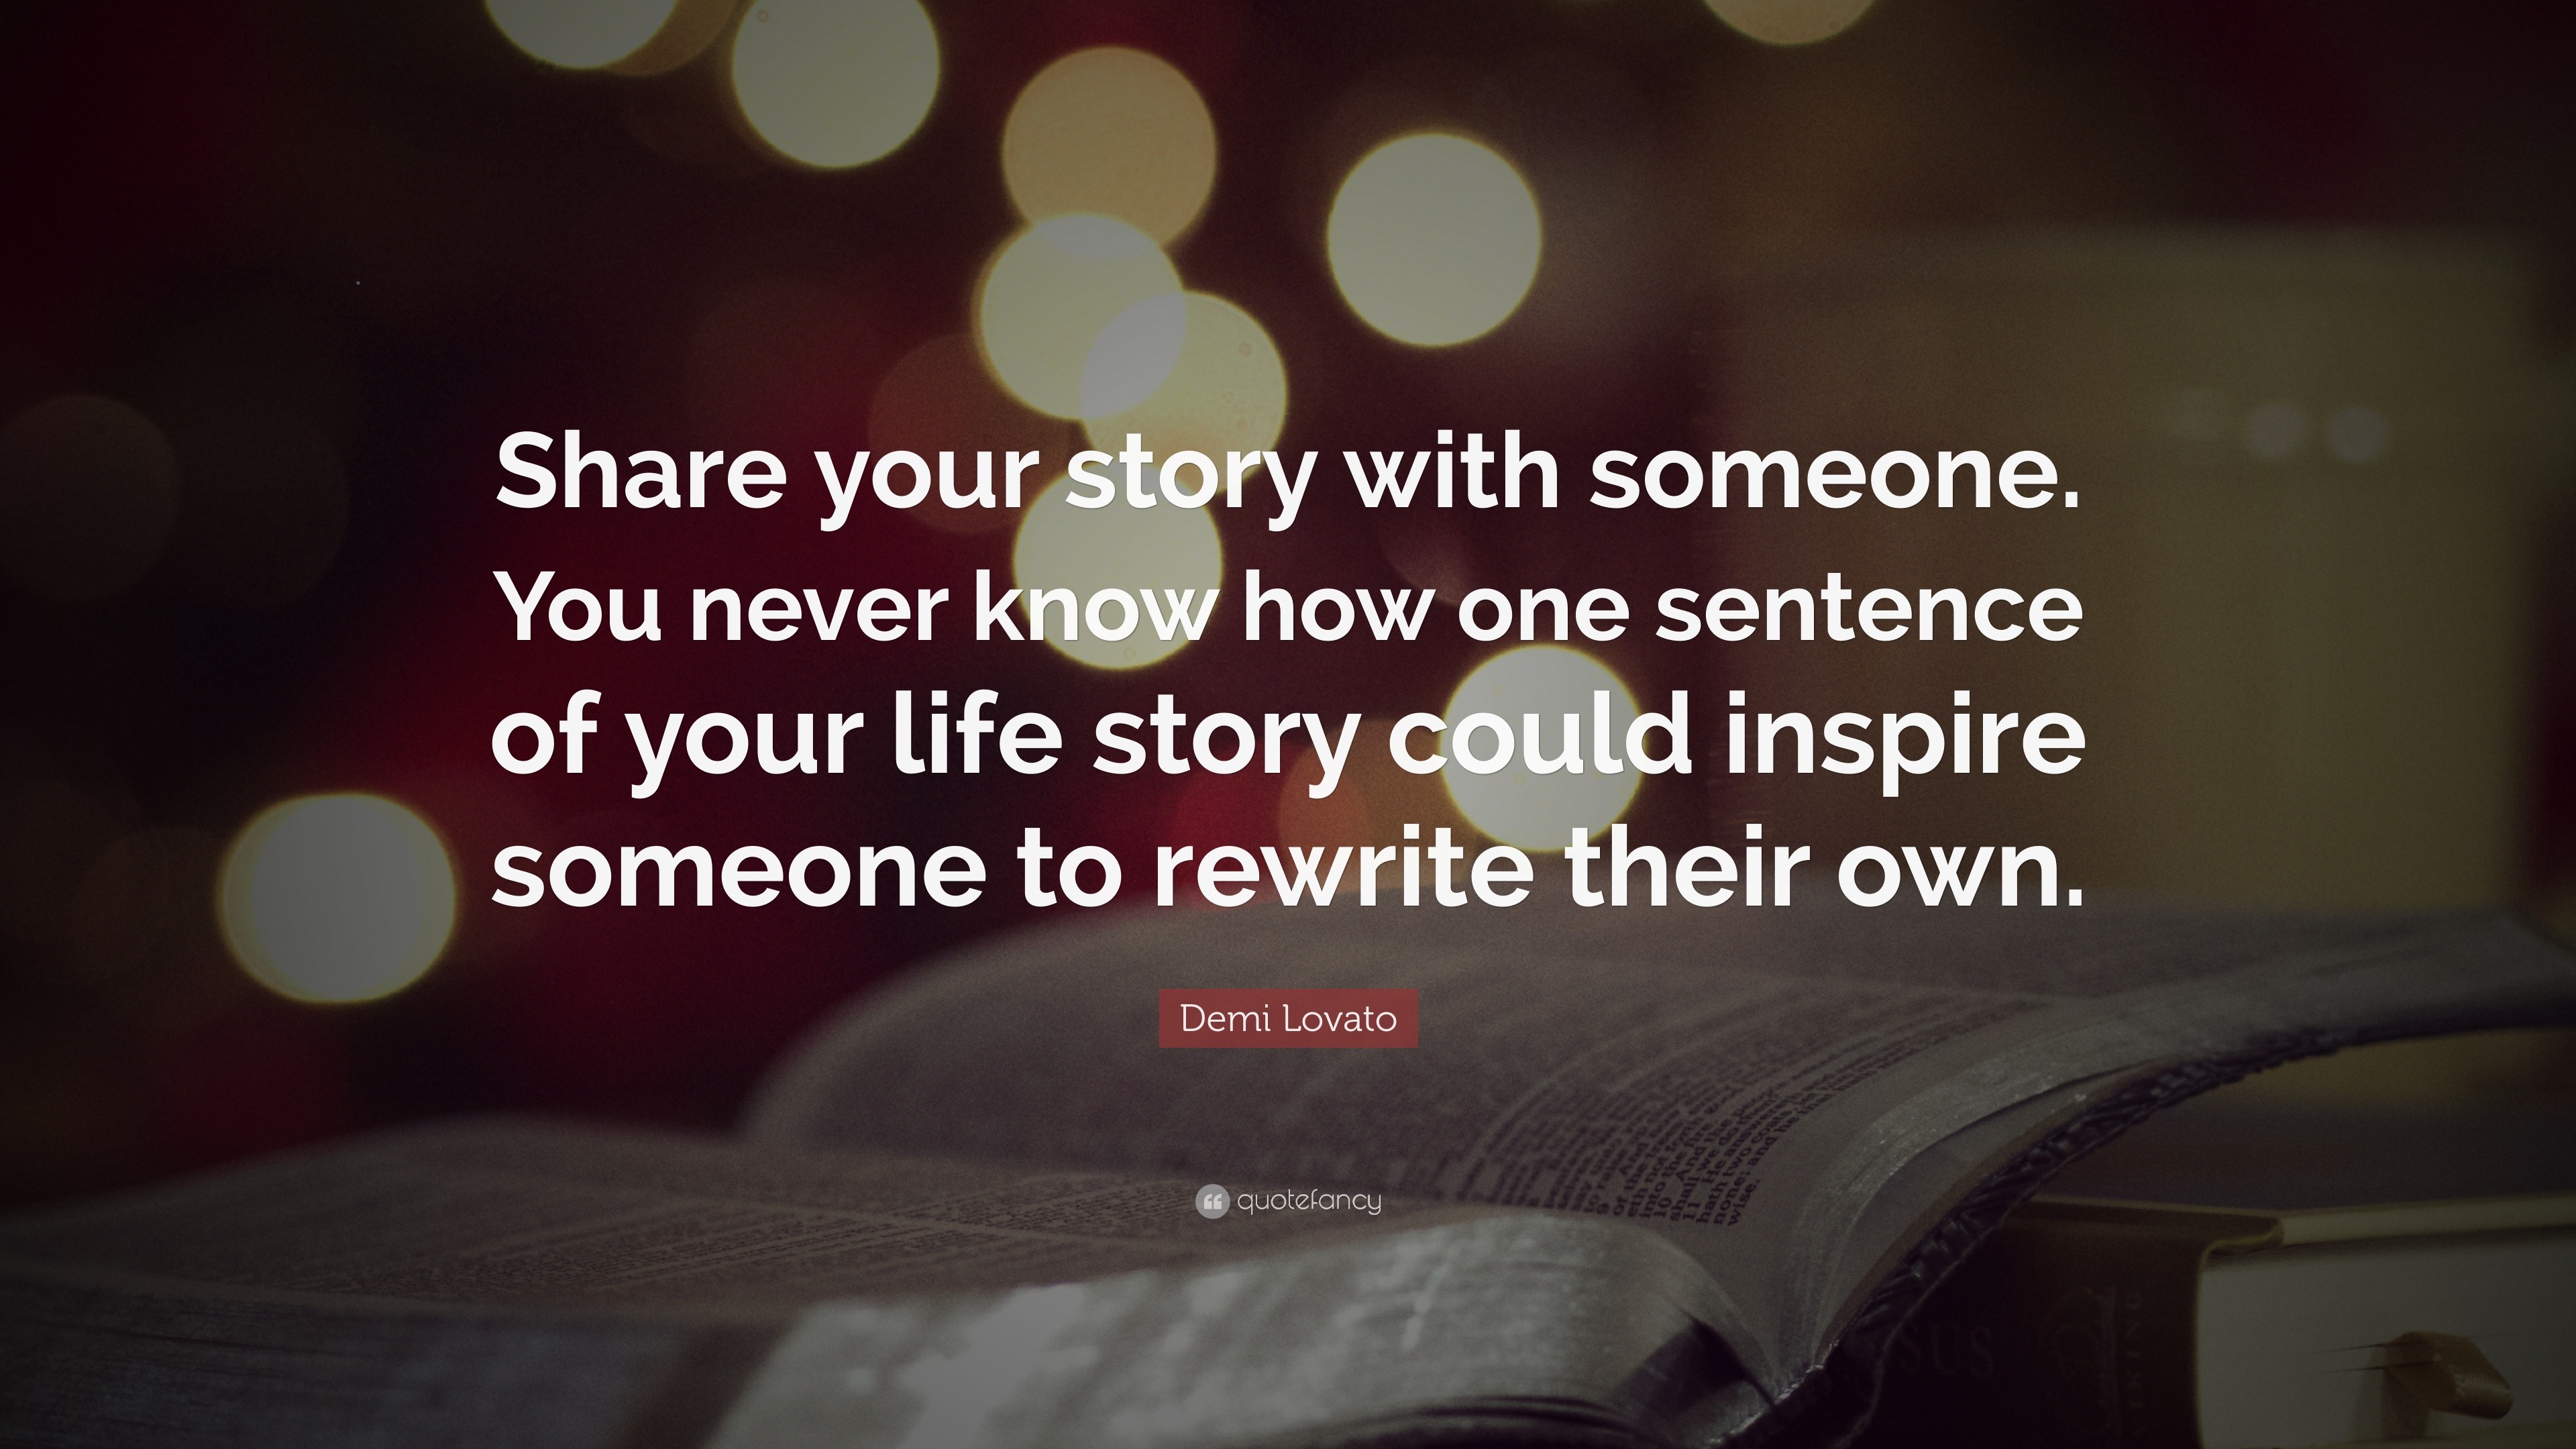 Demi Lovato Quote: “Share your story with someone. You never know how